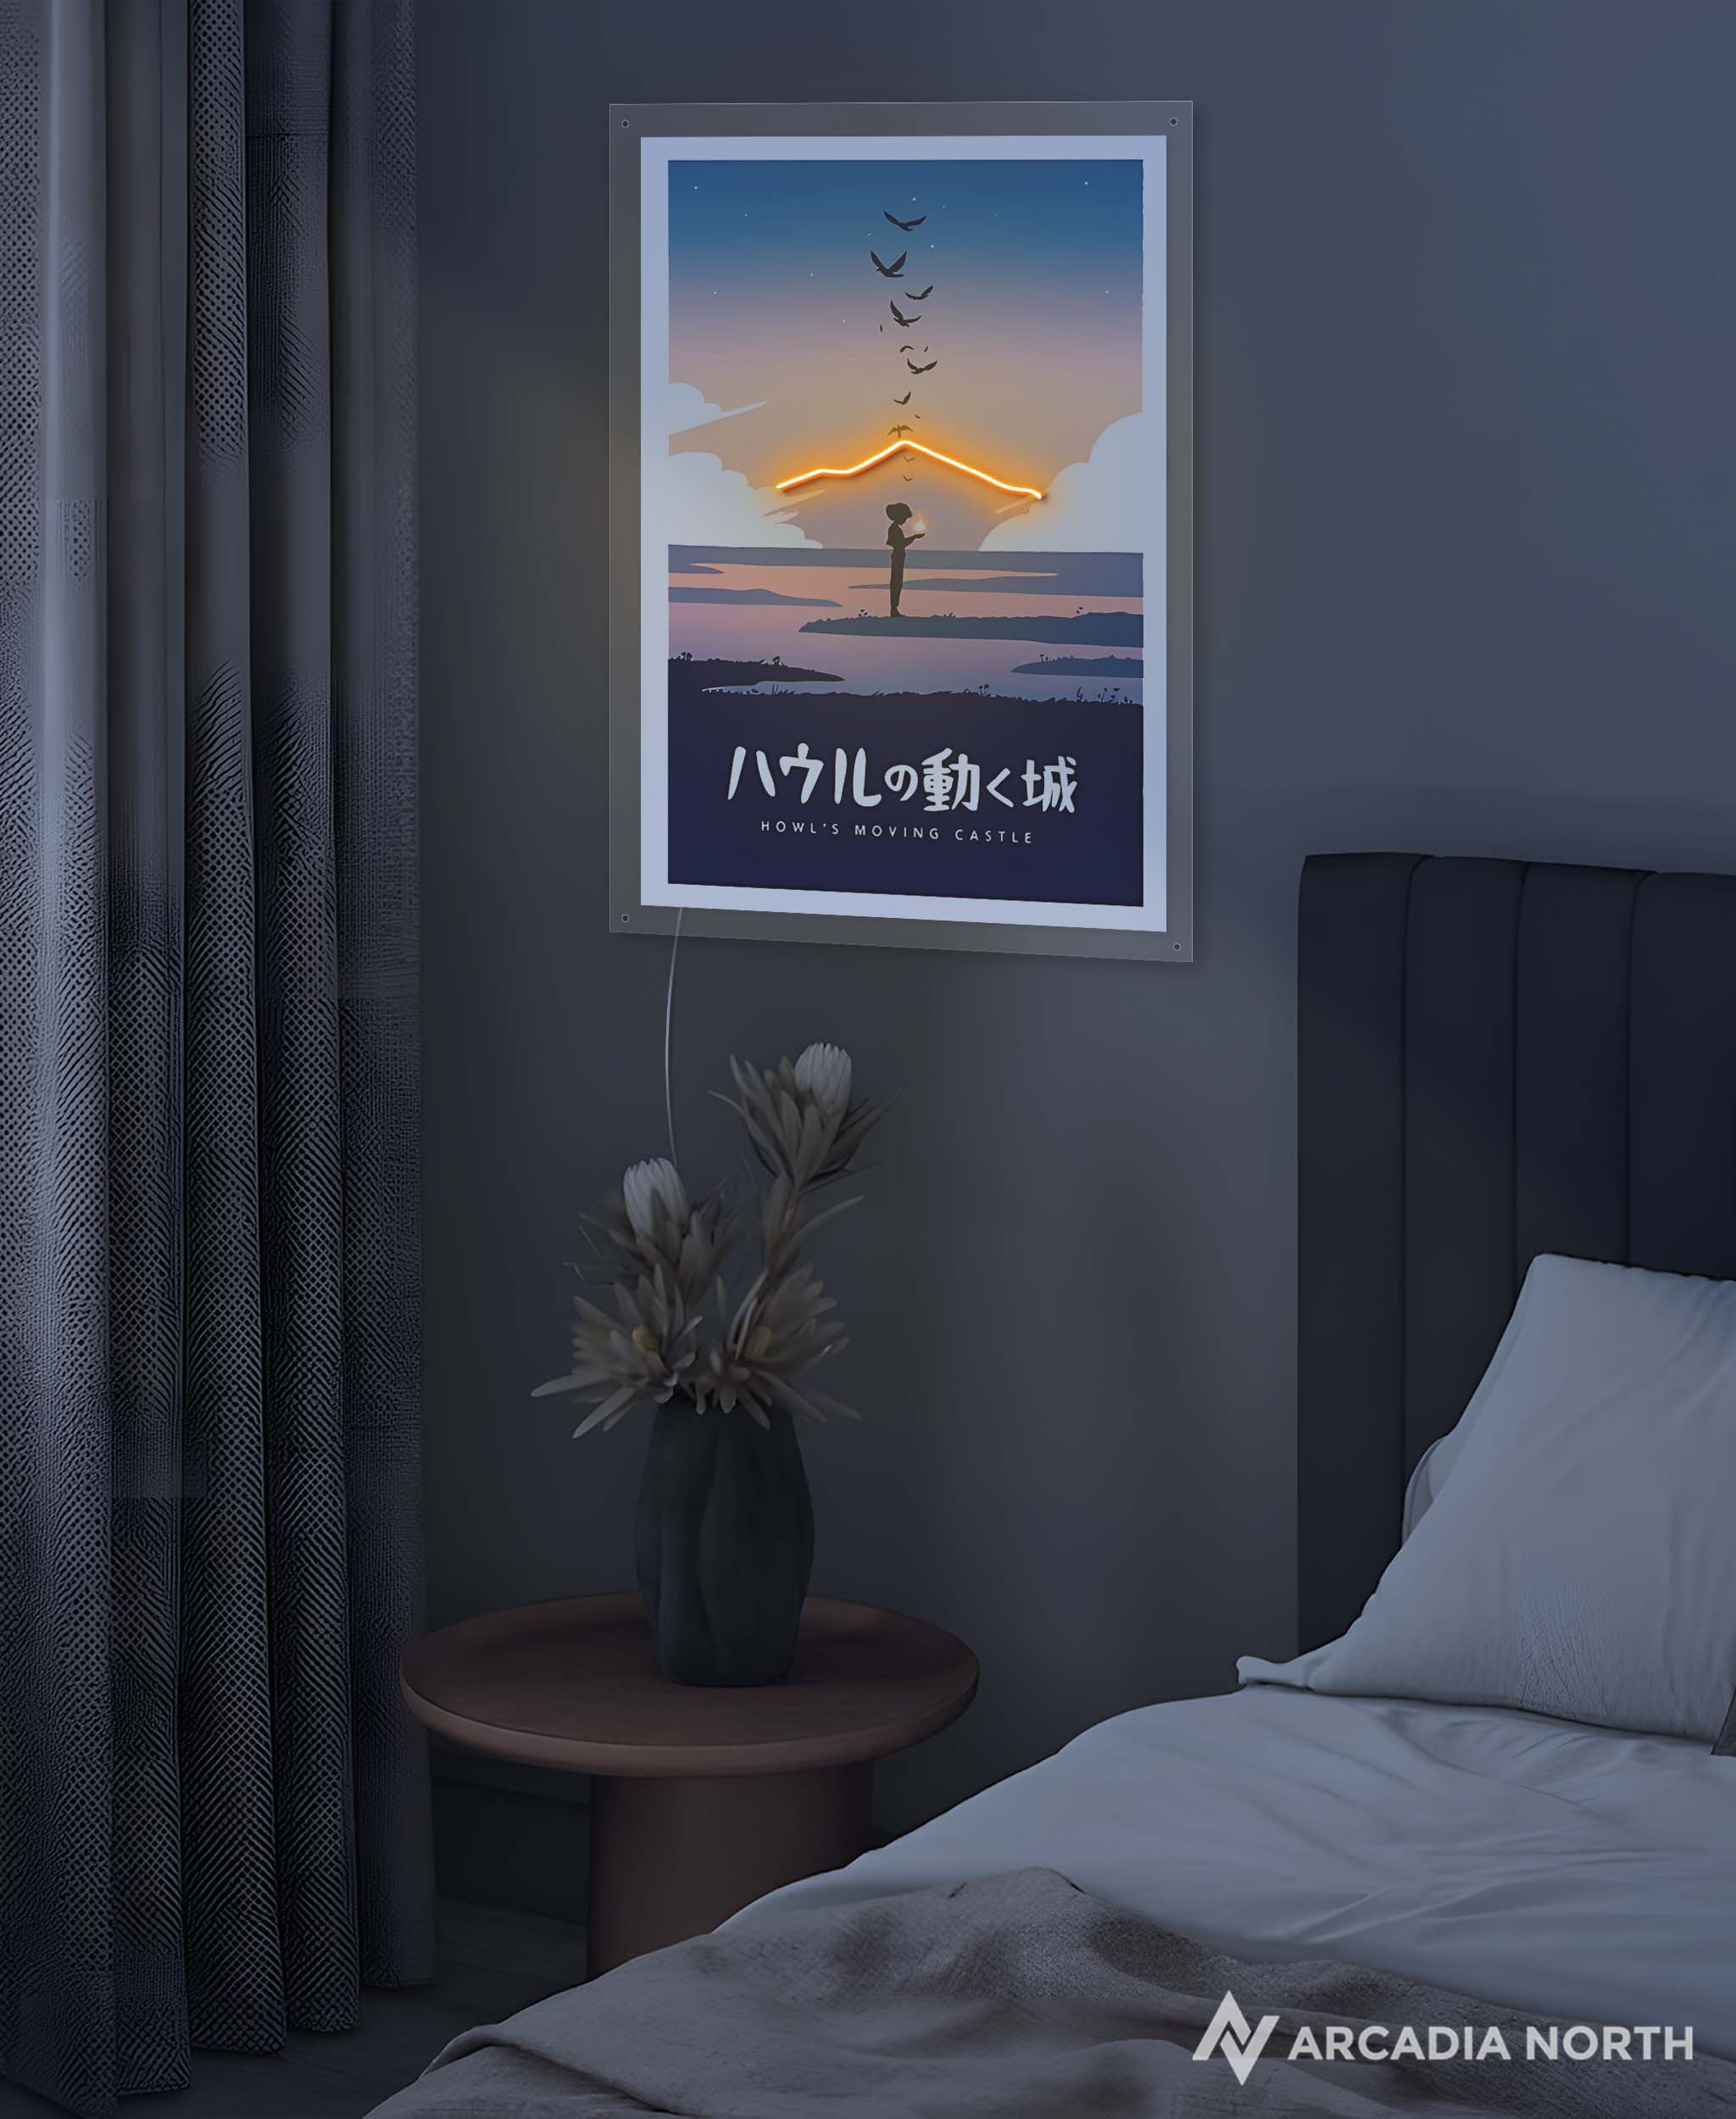 Arcadia North AURALIGHT Original LED Poster featuring the Studio Ghibli anime Howl's Moving Castle in minimalistic style illuminated by LED neon lights. UV-printed poster on acrylic.